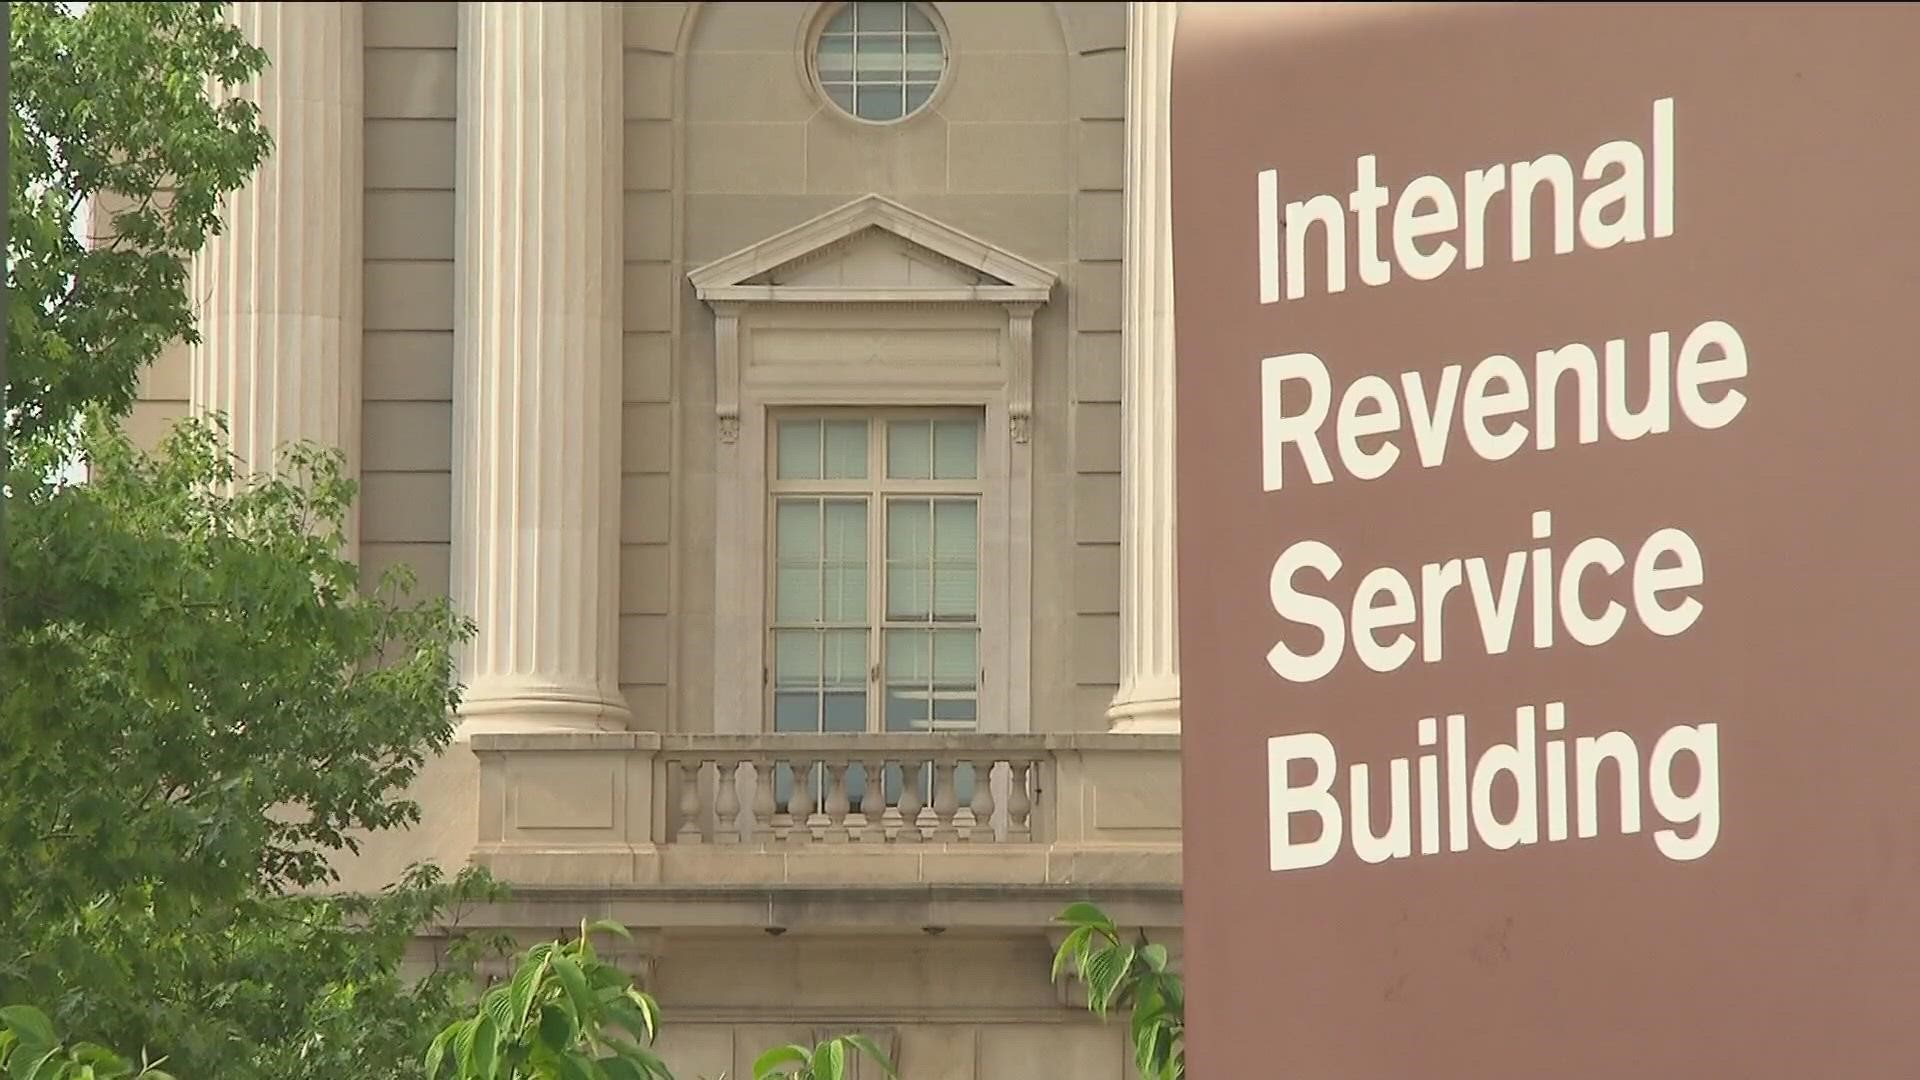 Less than a week after telling payment recipients to delay filing returns, the IRS said it won’t challenge the taxability of some payments.